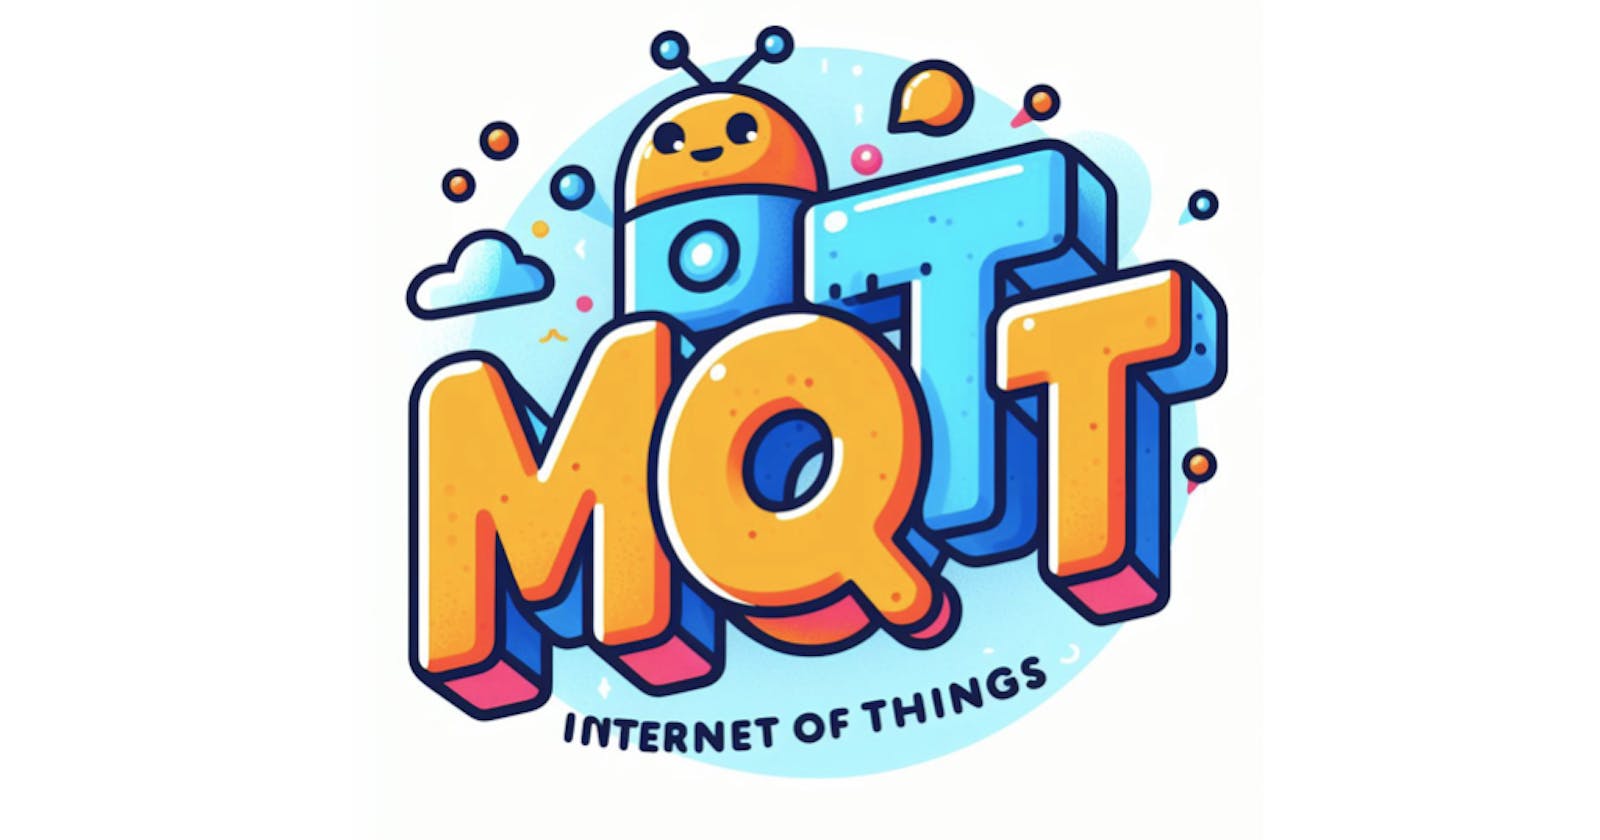 Mastering Secure MQTT with Python